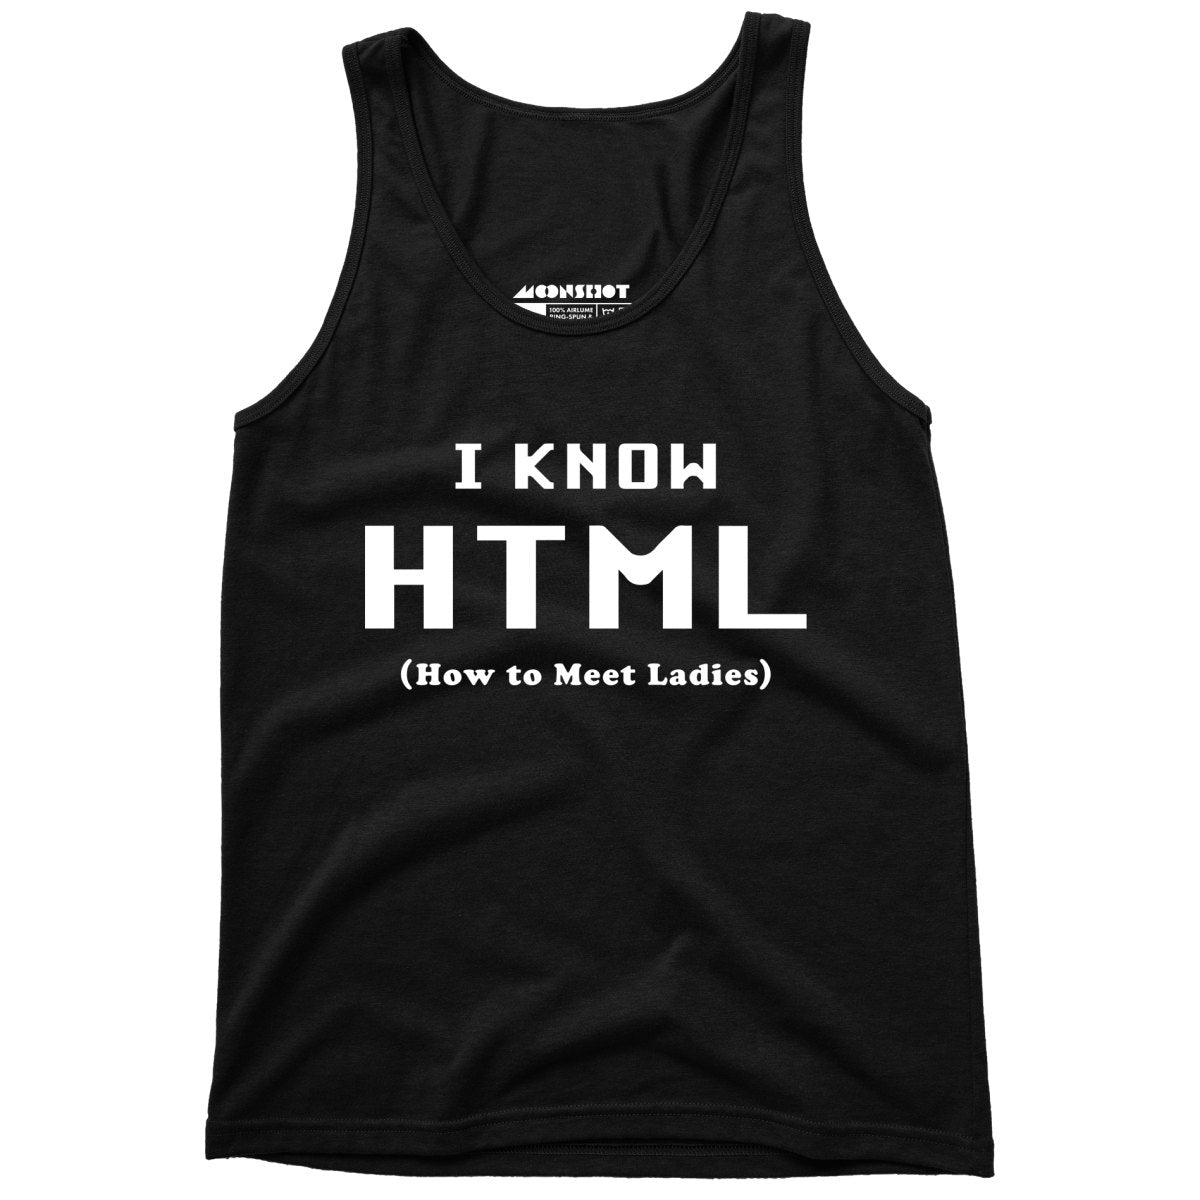 I Know HTML - How to Meet Ladies - Unisex Tank Top